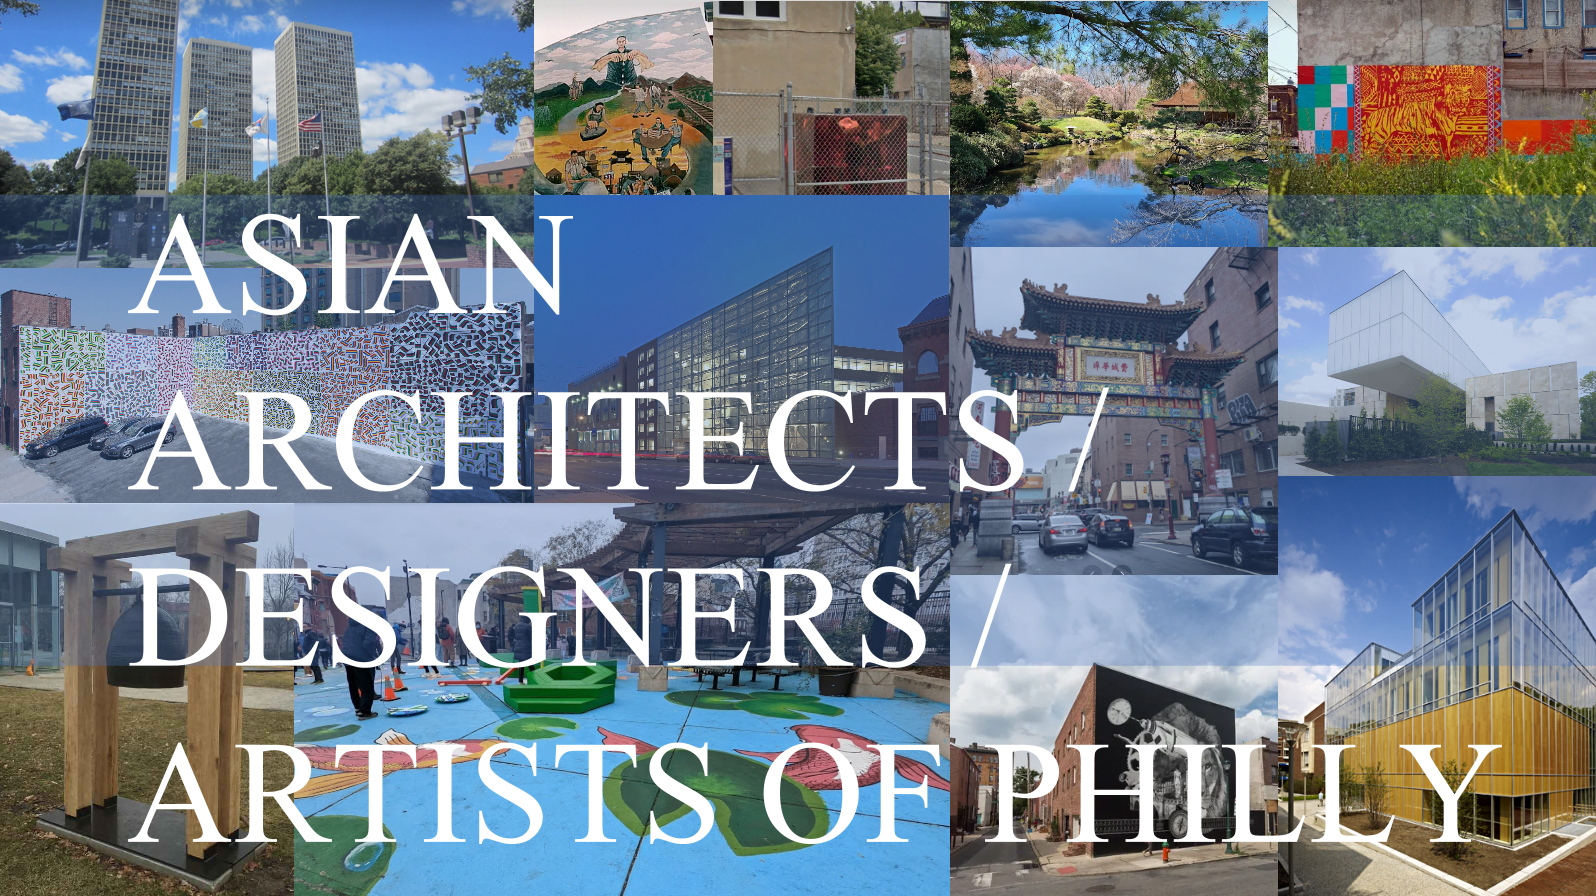 Collage of images of projects created by Asian architects / designers / artists in Philadelphia